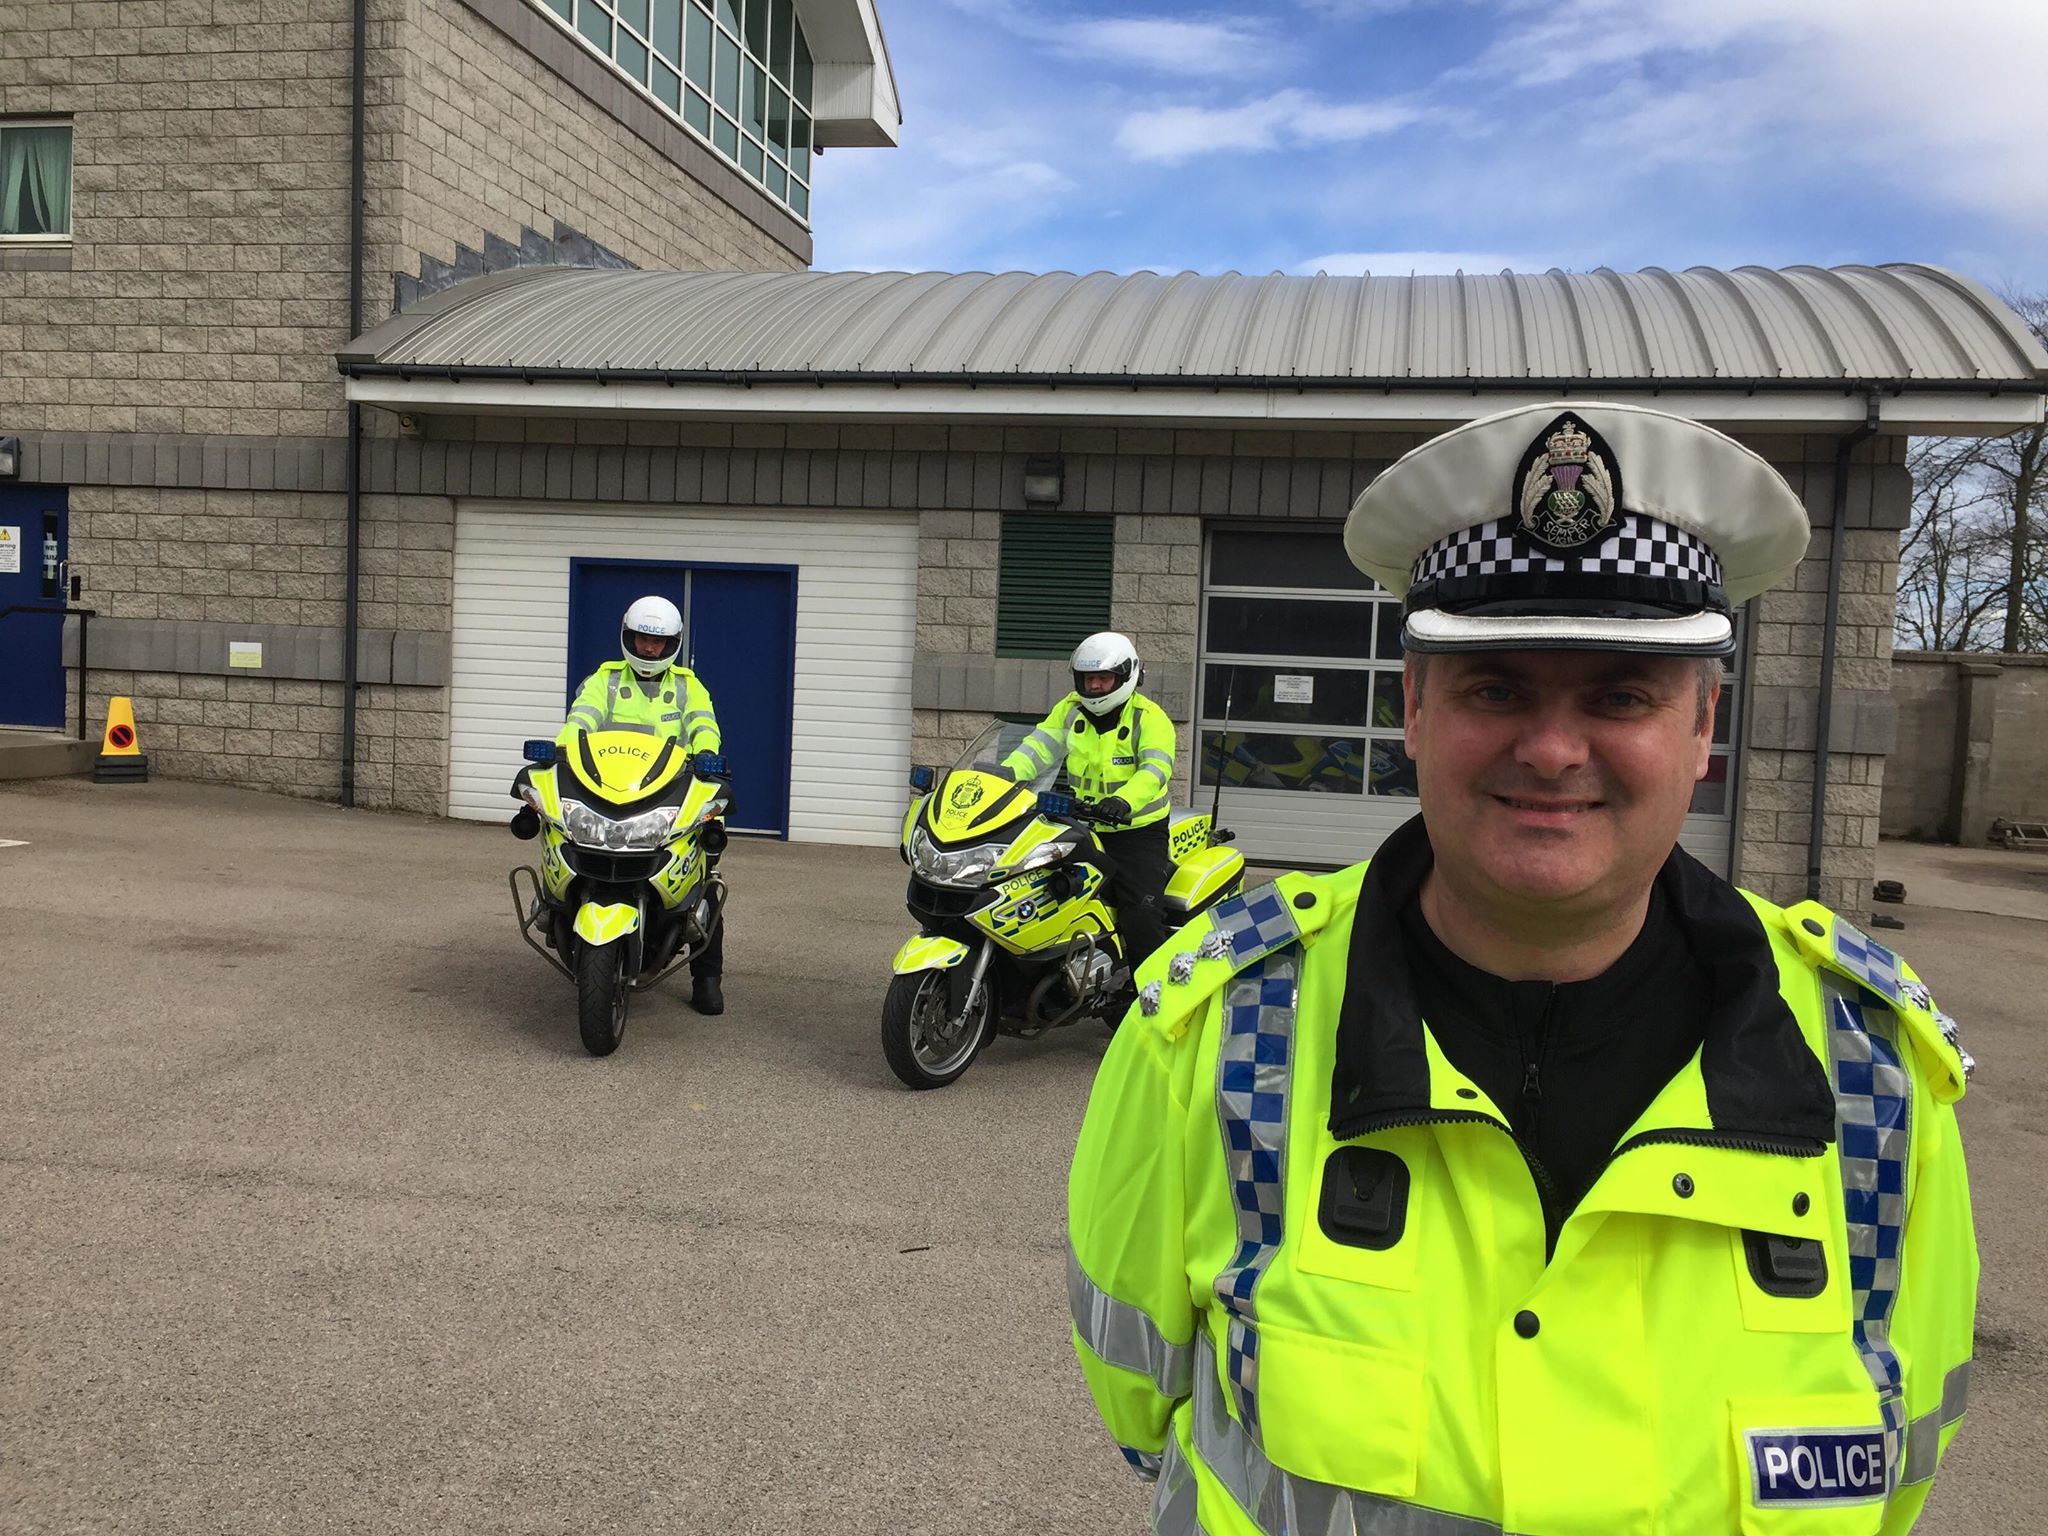 The Rider Refinement North training initiative was launched in Inverurie aimed at reducing motorcyclist deaths across Scotland.

Photo by Joanne Warnock.